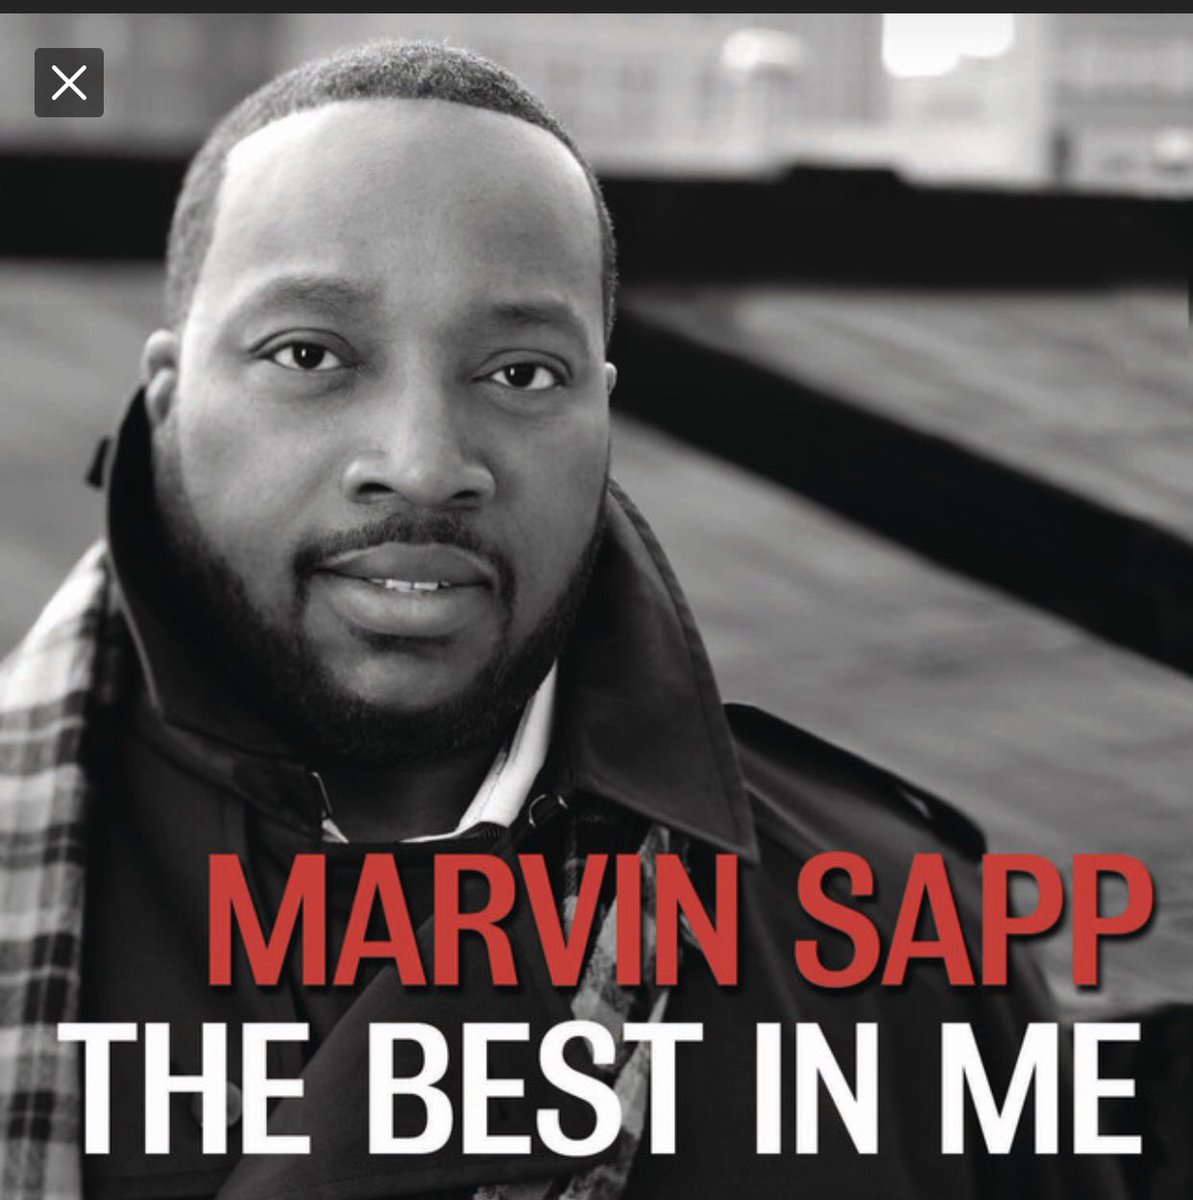 Those who follow me know I love and adore Black gospel. Tonight’s musical interlude:  the outstanding Marvin Sapp. When I was struggling…he was an anchor in my storm. Thank you, Marvin. 💕💕💕💕@MichaelBrads2 @musicmaned @CundiffVanessa @softtail65 @marvinsapp